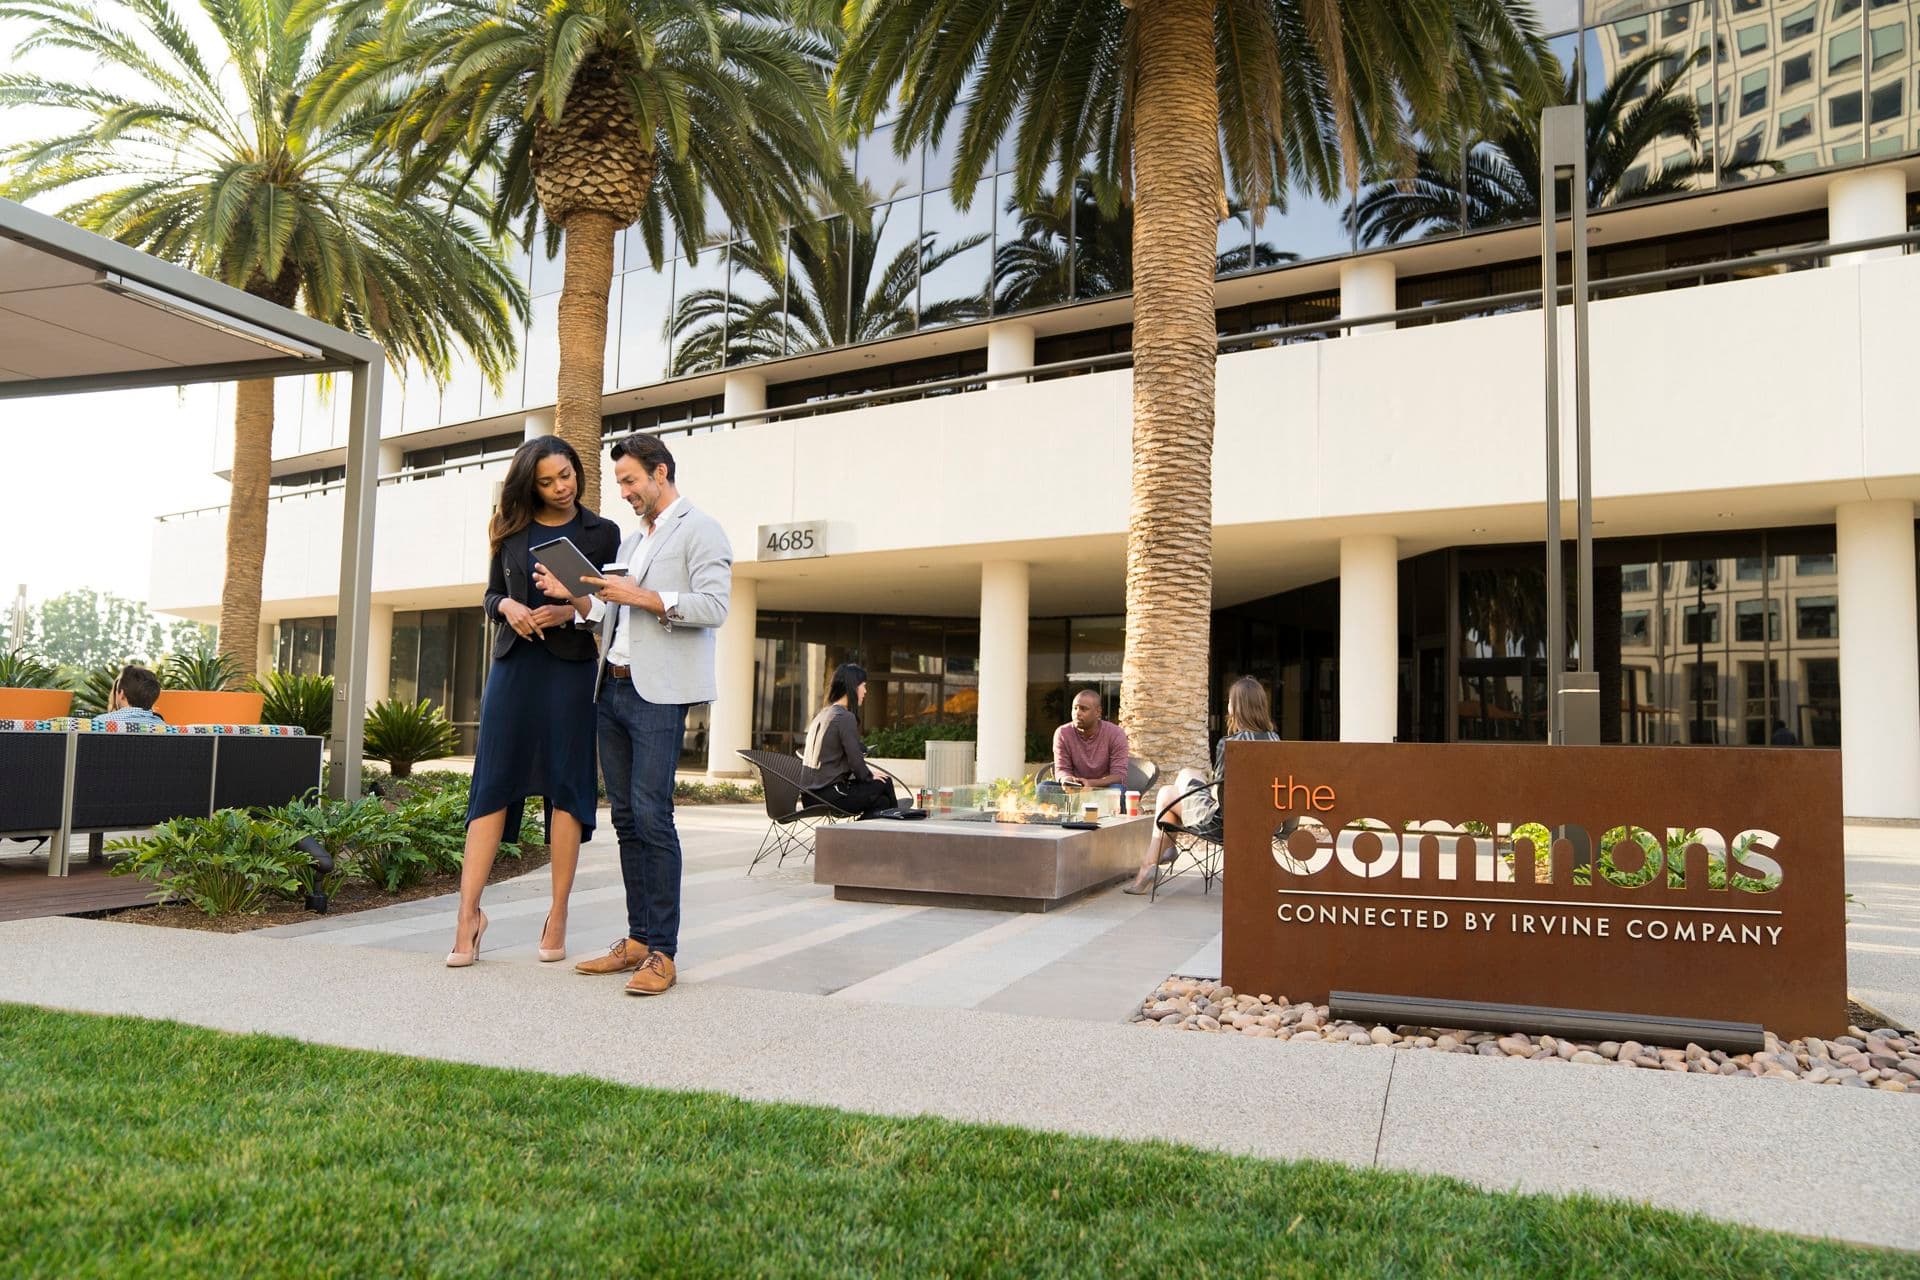 Lifestyle photography of the Commons at MacArthur Court, Newport Beach, Ca